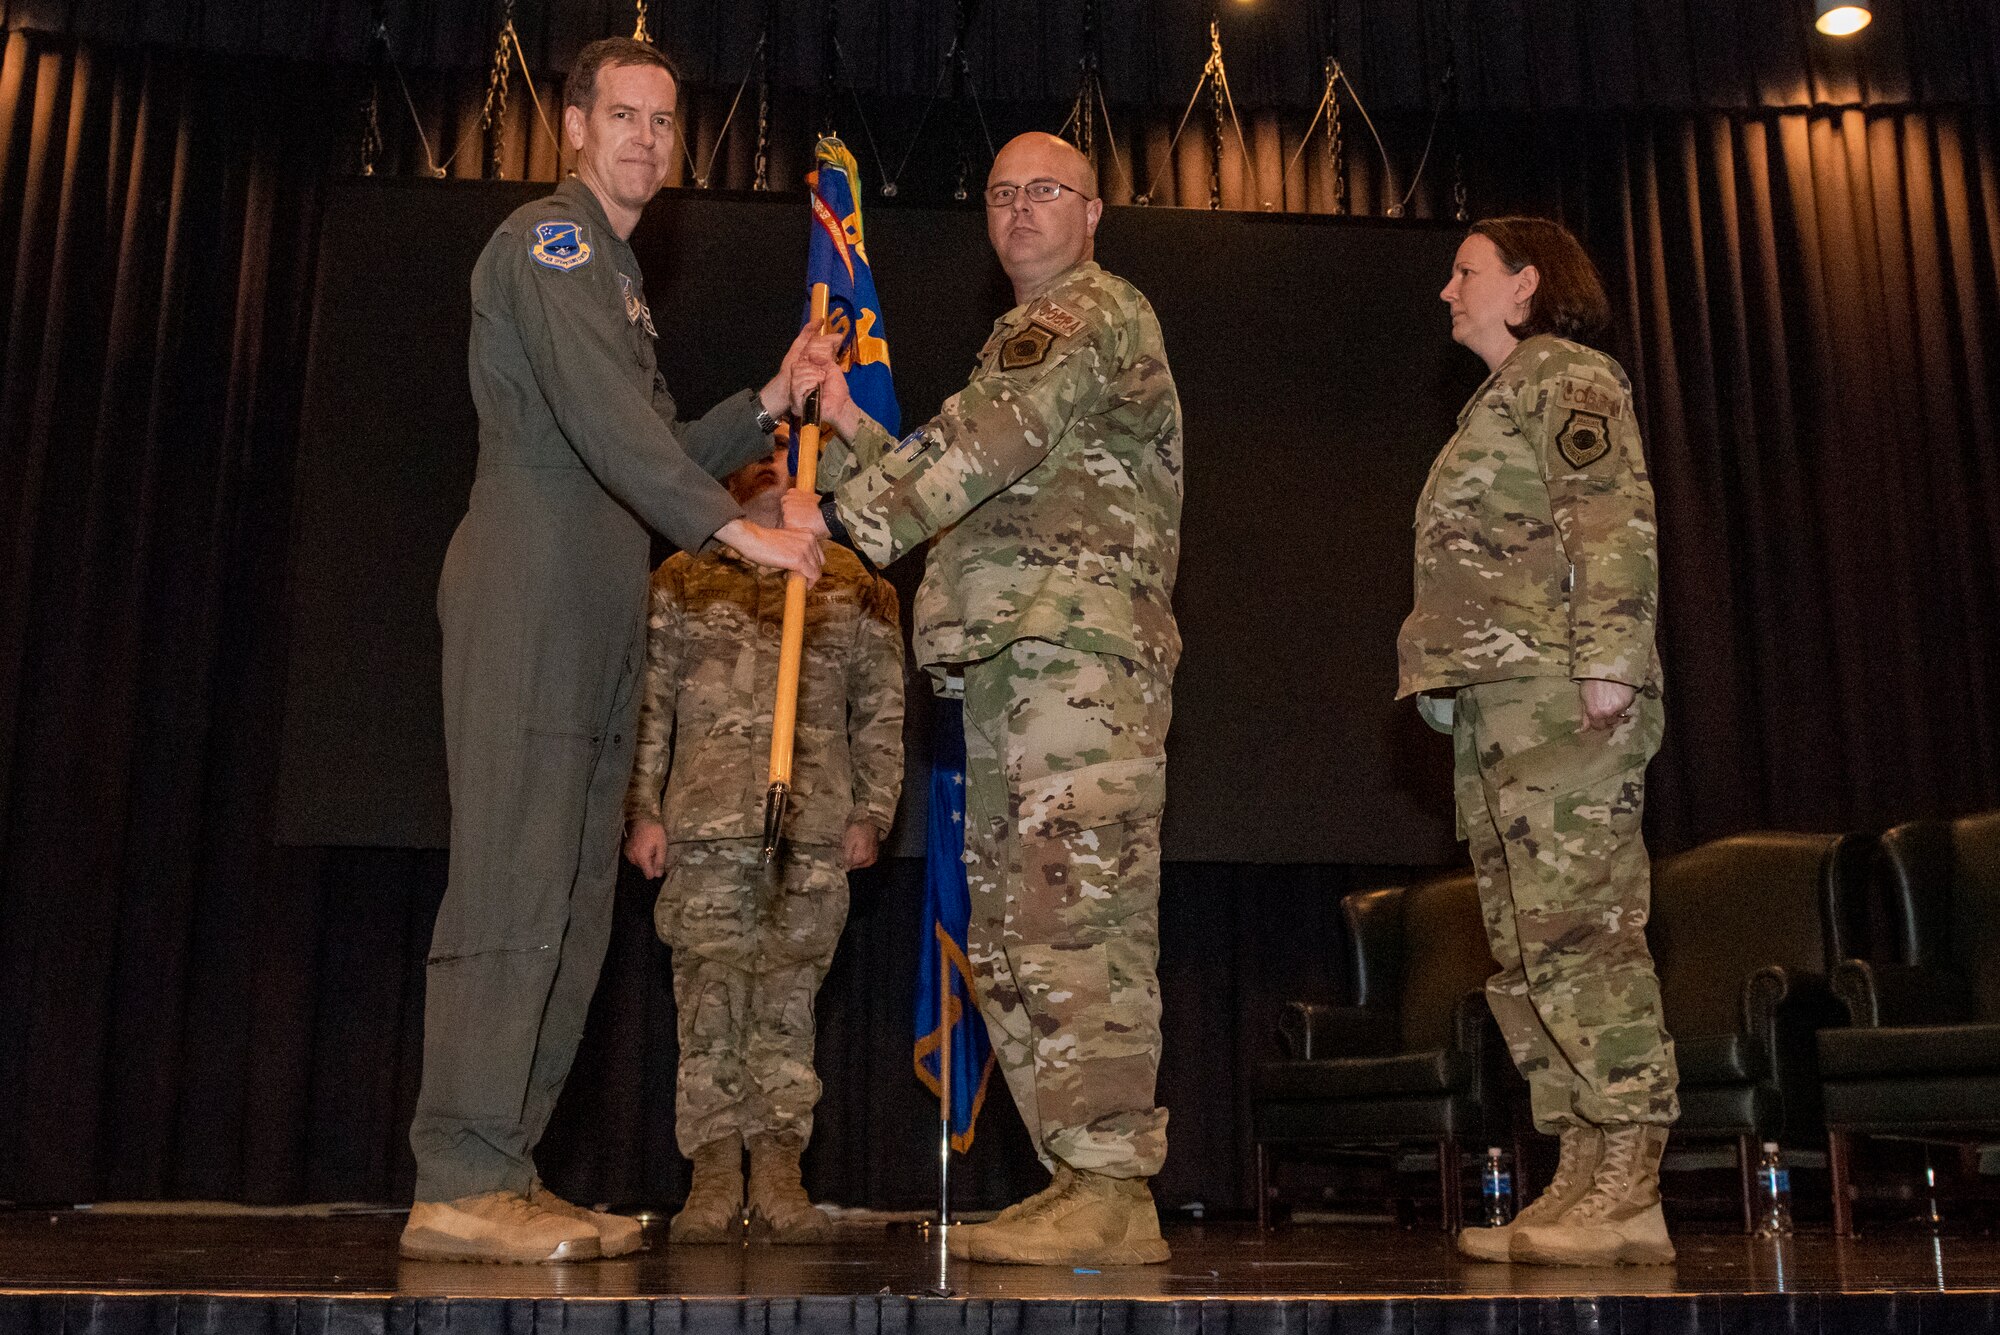 621st Air Control Squadron held a change of command ceremony at Osan Air Base, Republic of Korea, May 17, 2021.